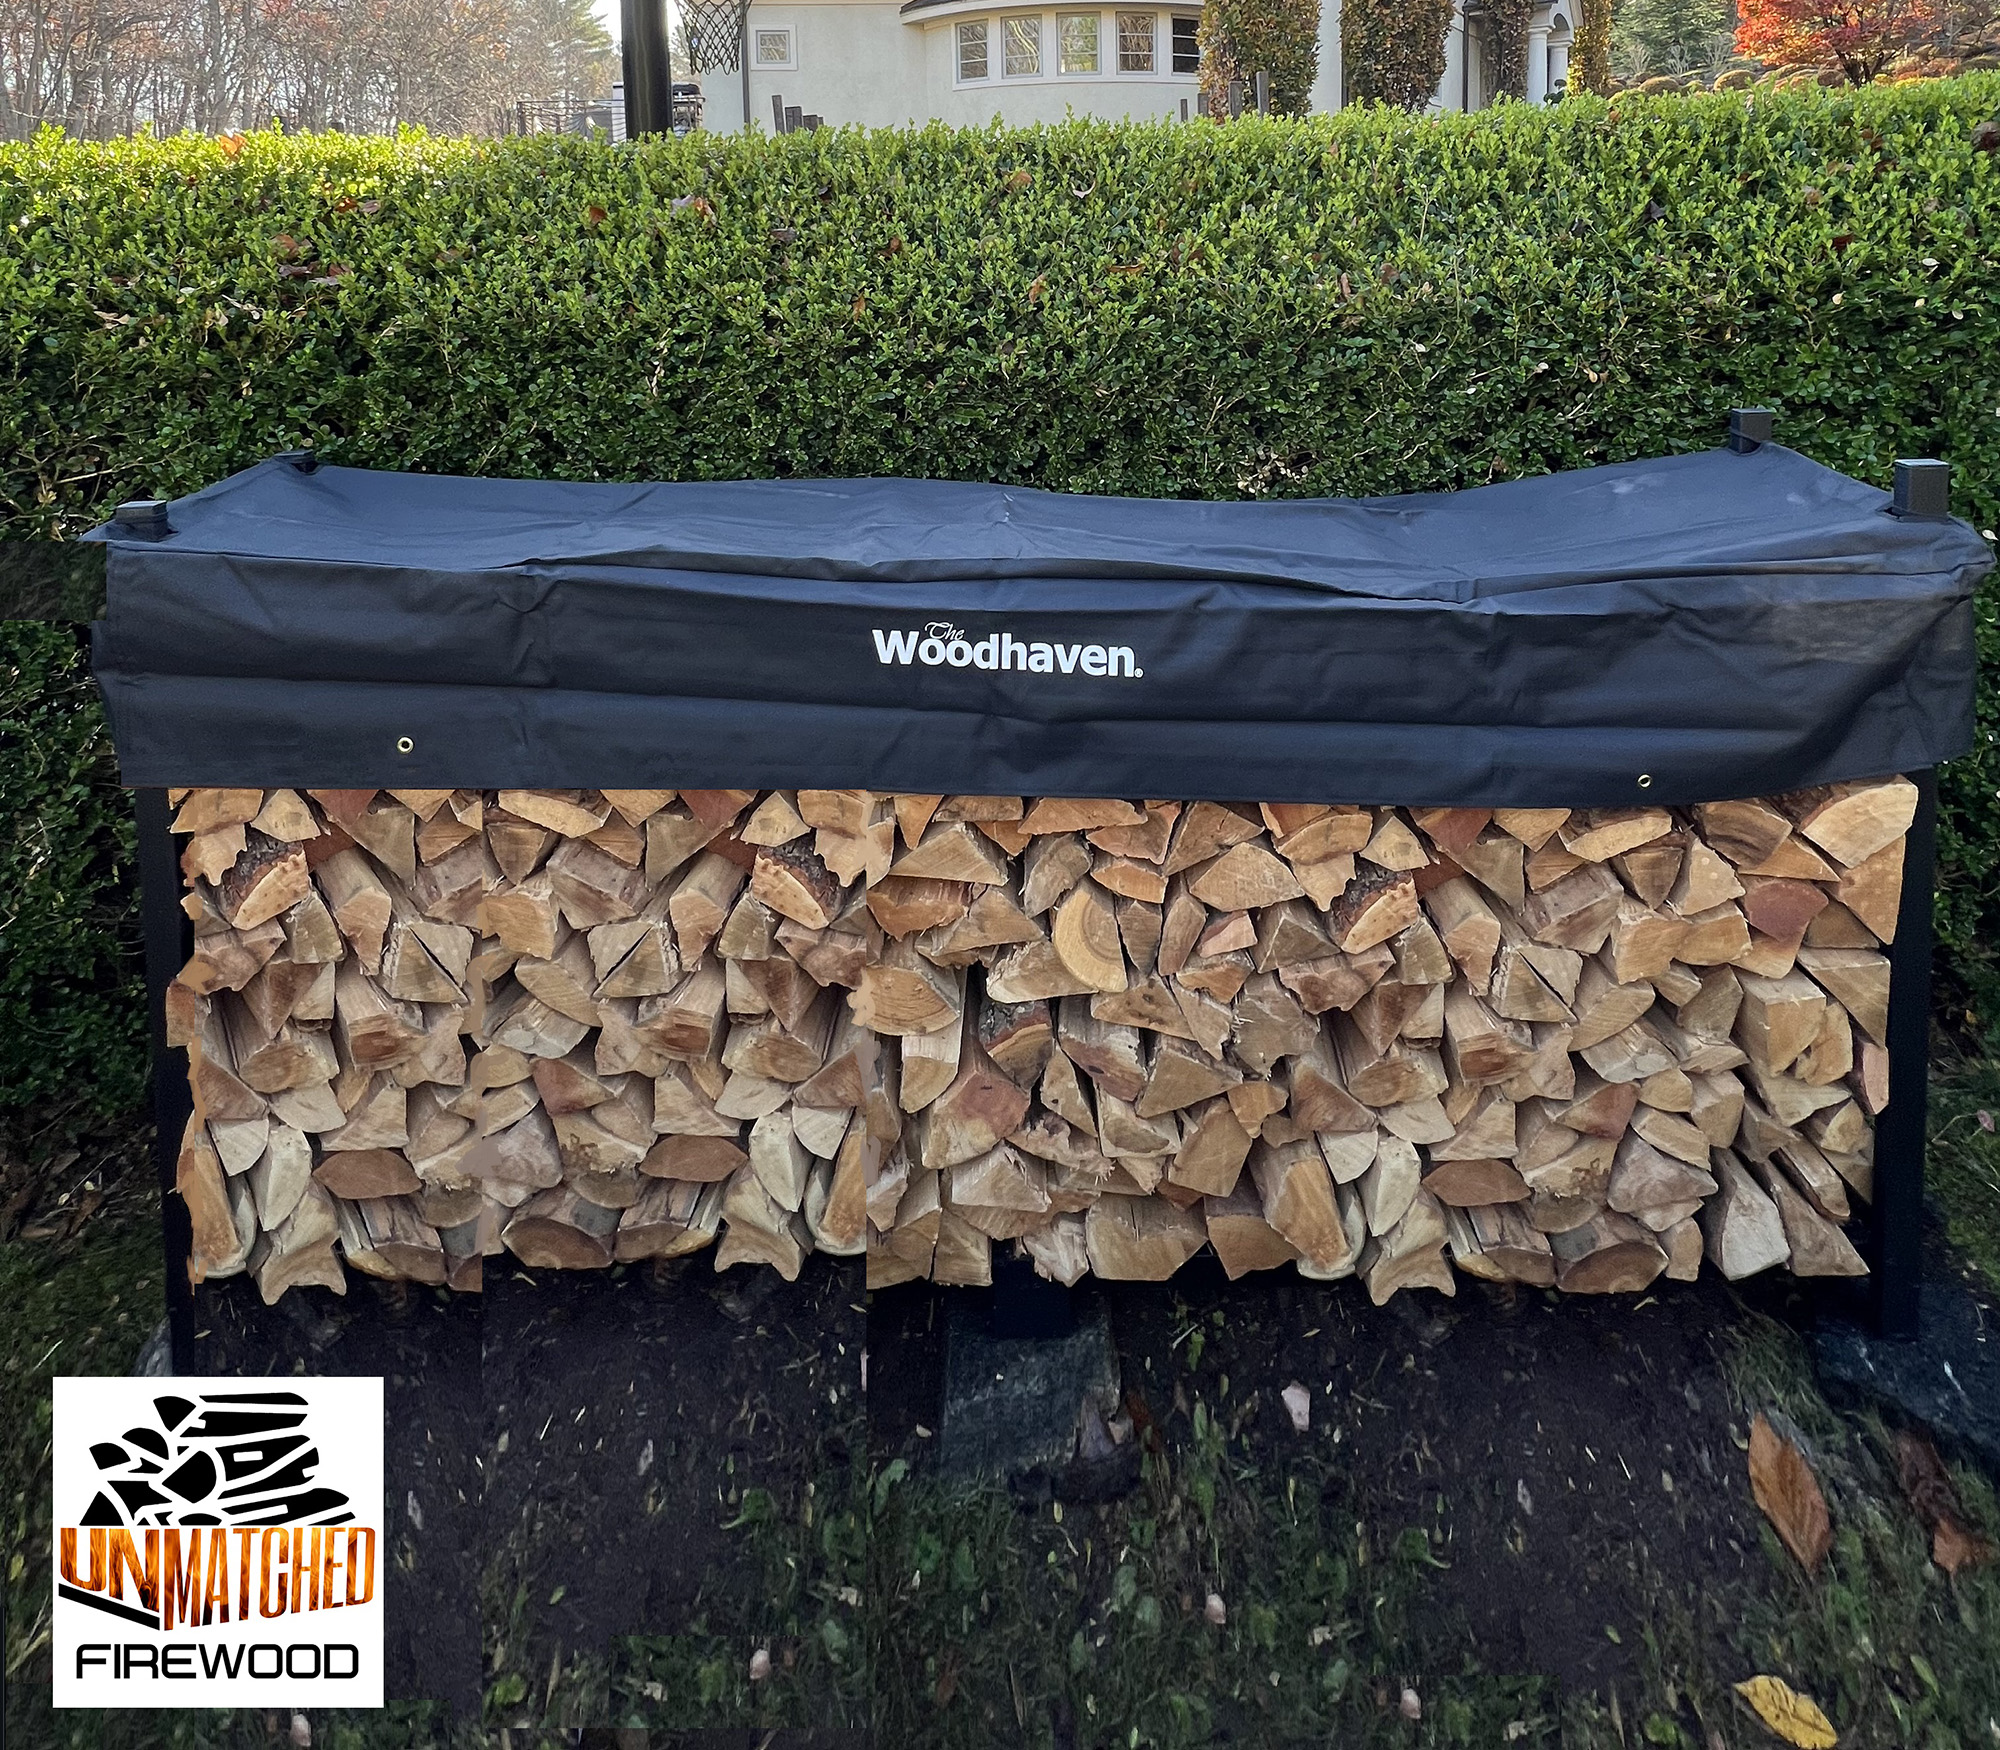 Unmatched Firewood: Stamford Firewood